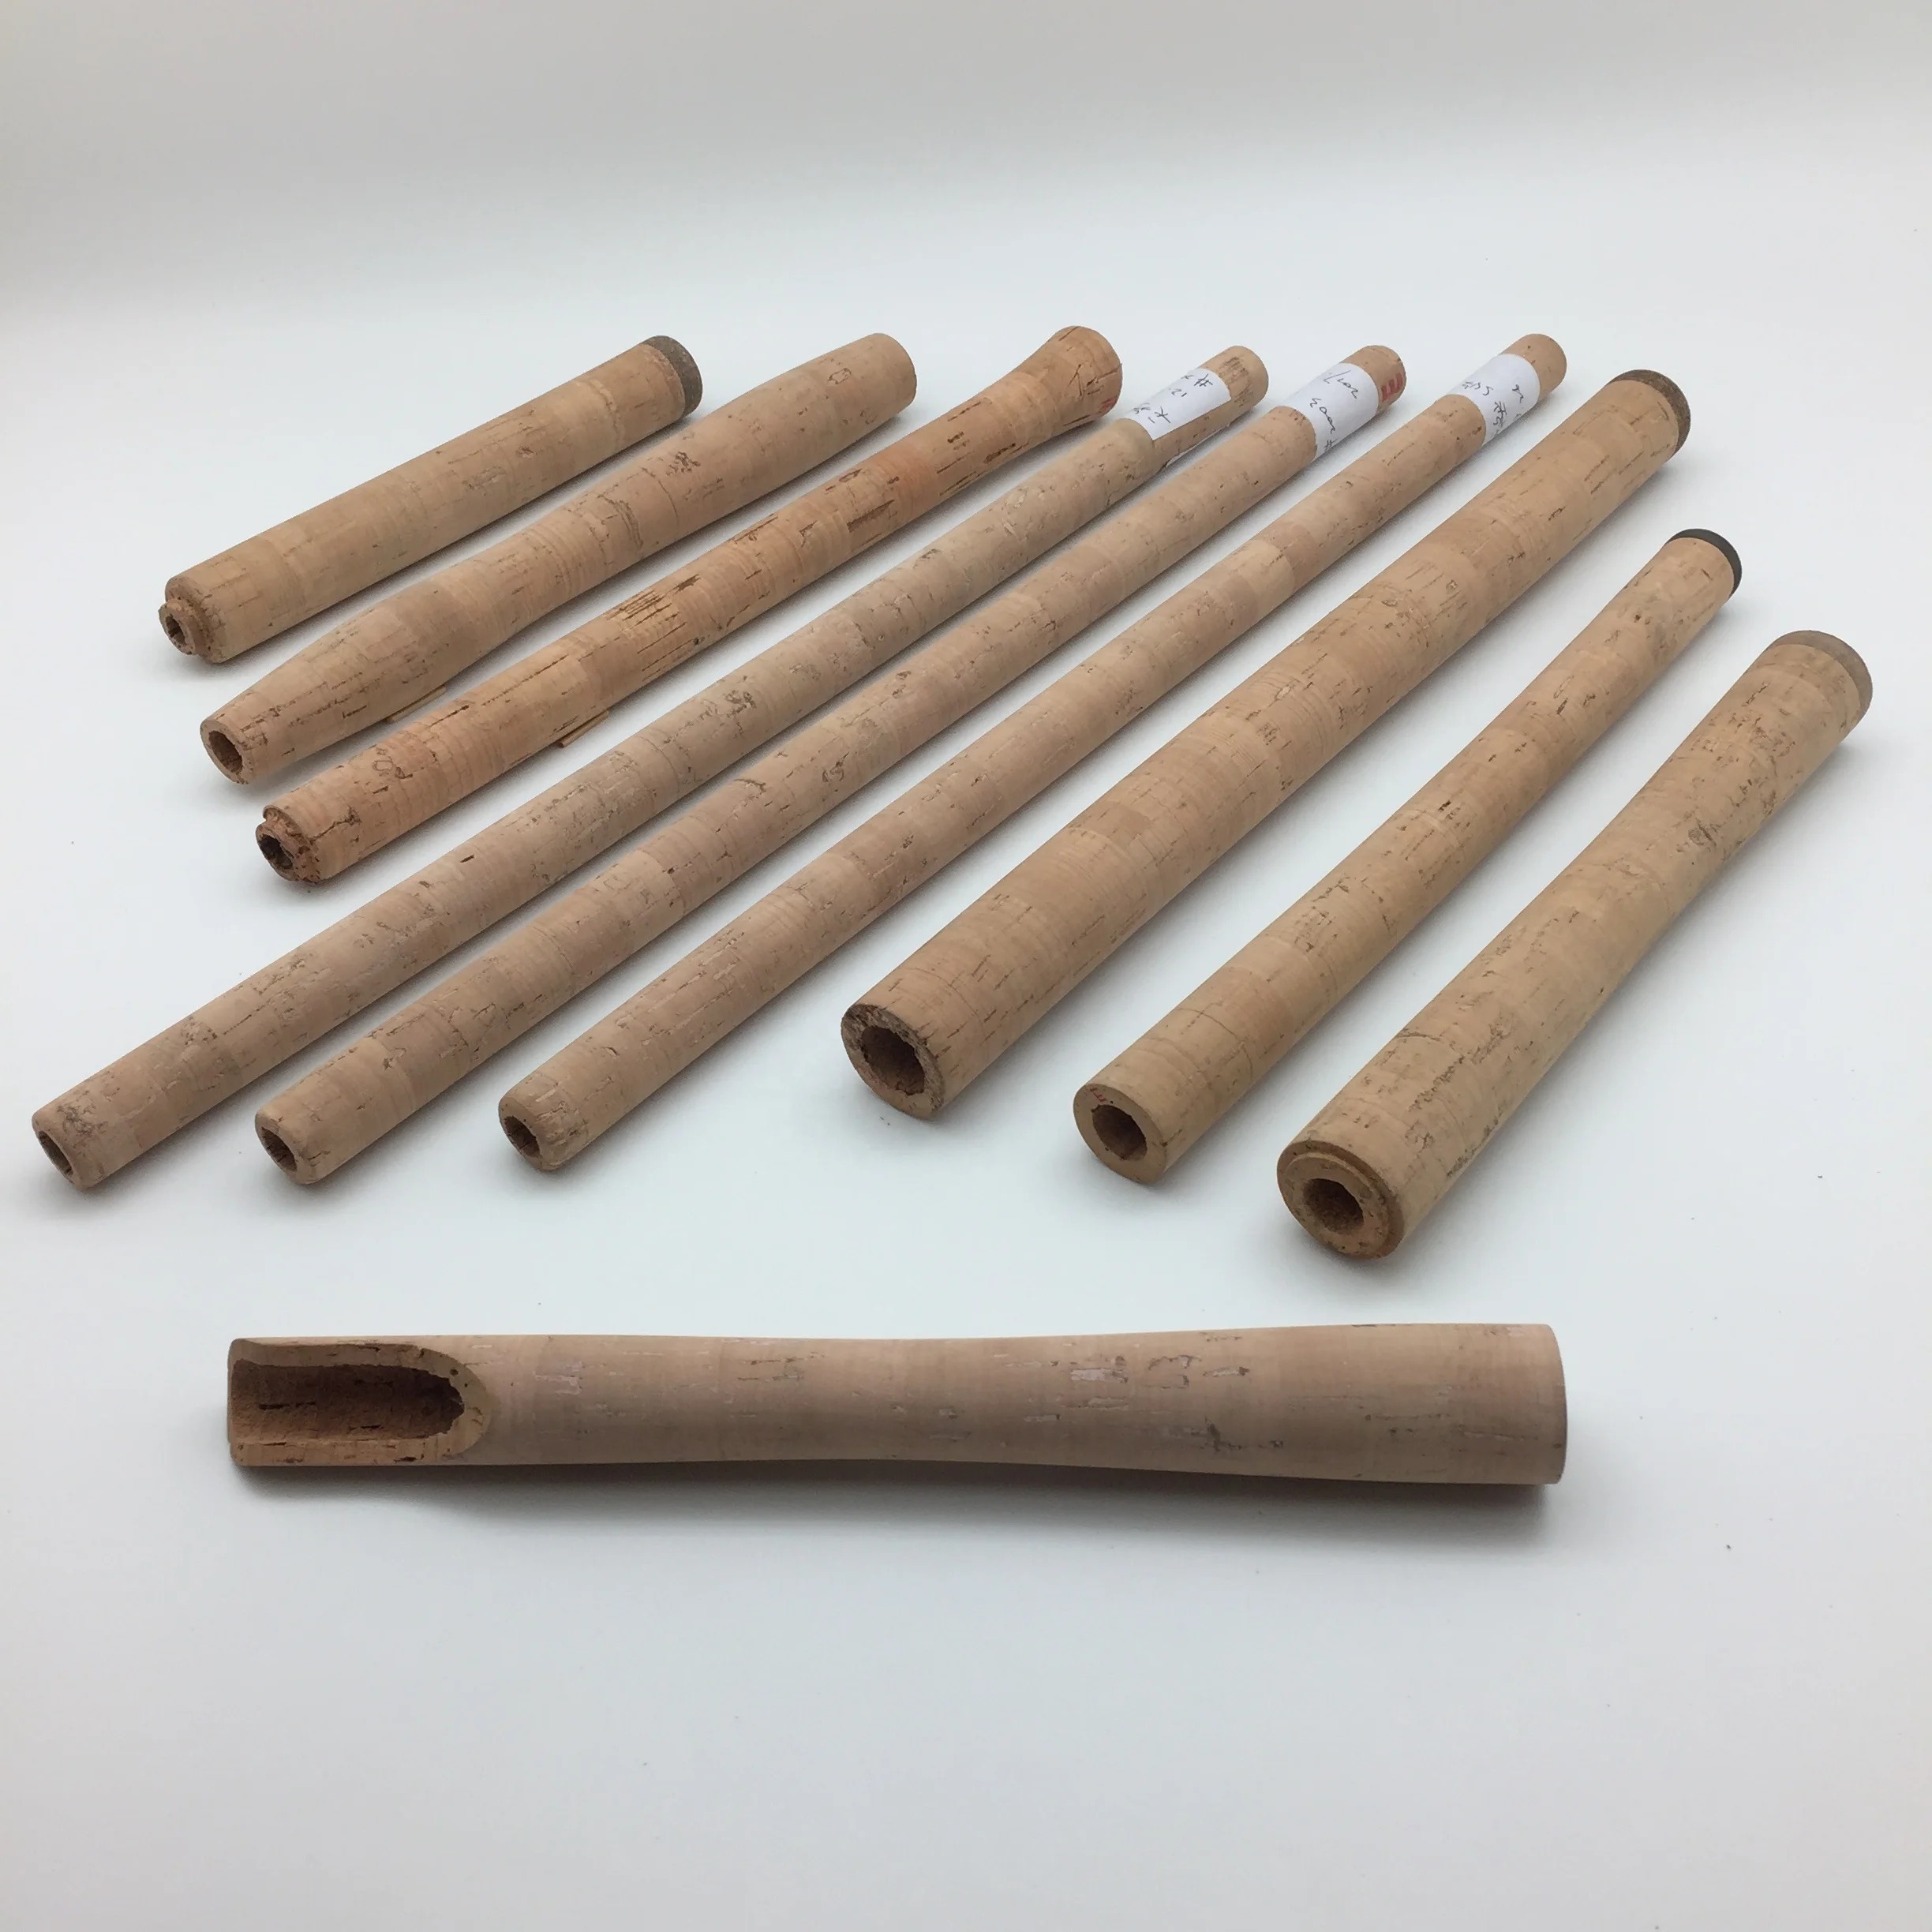 LEECORK 27mm Max Outer Dia. x  190mm L Natural Cork Fishing Rod Grip for Fishing Rod Building